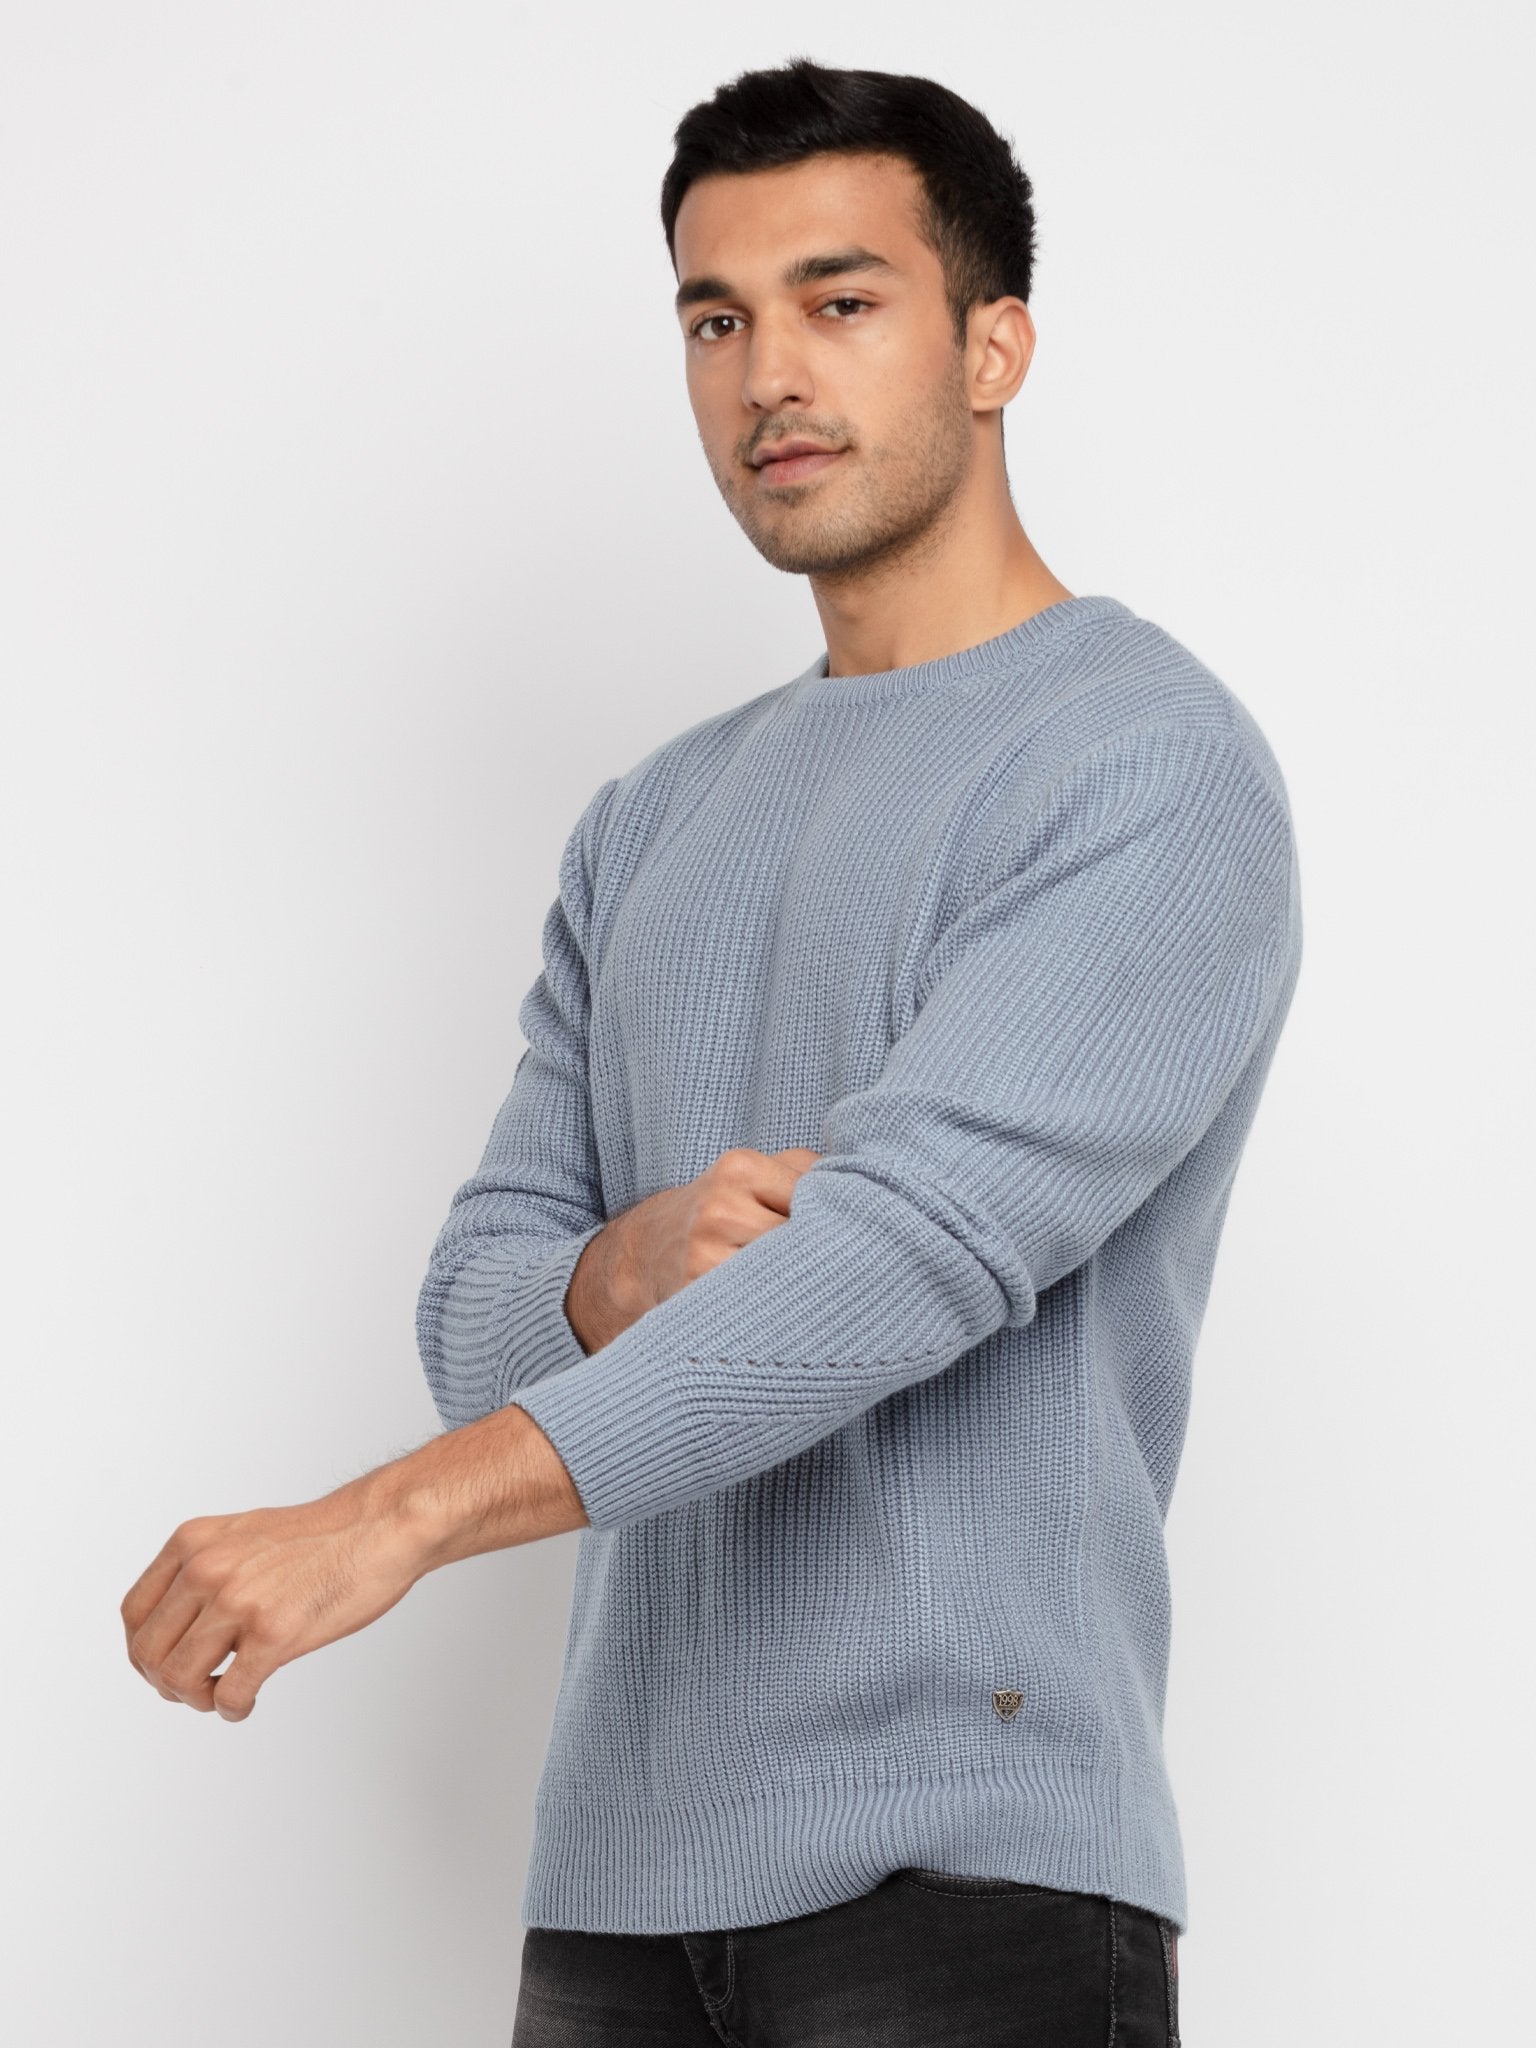 winter sweaters for men